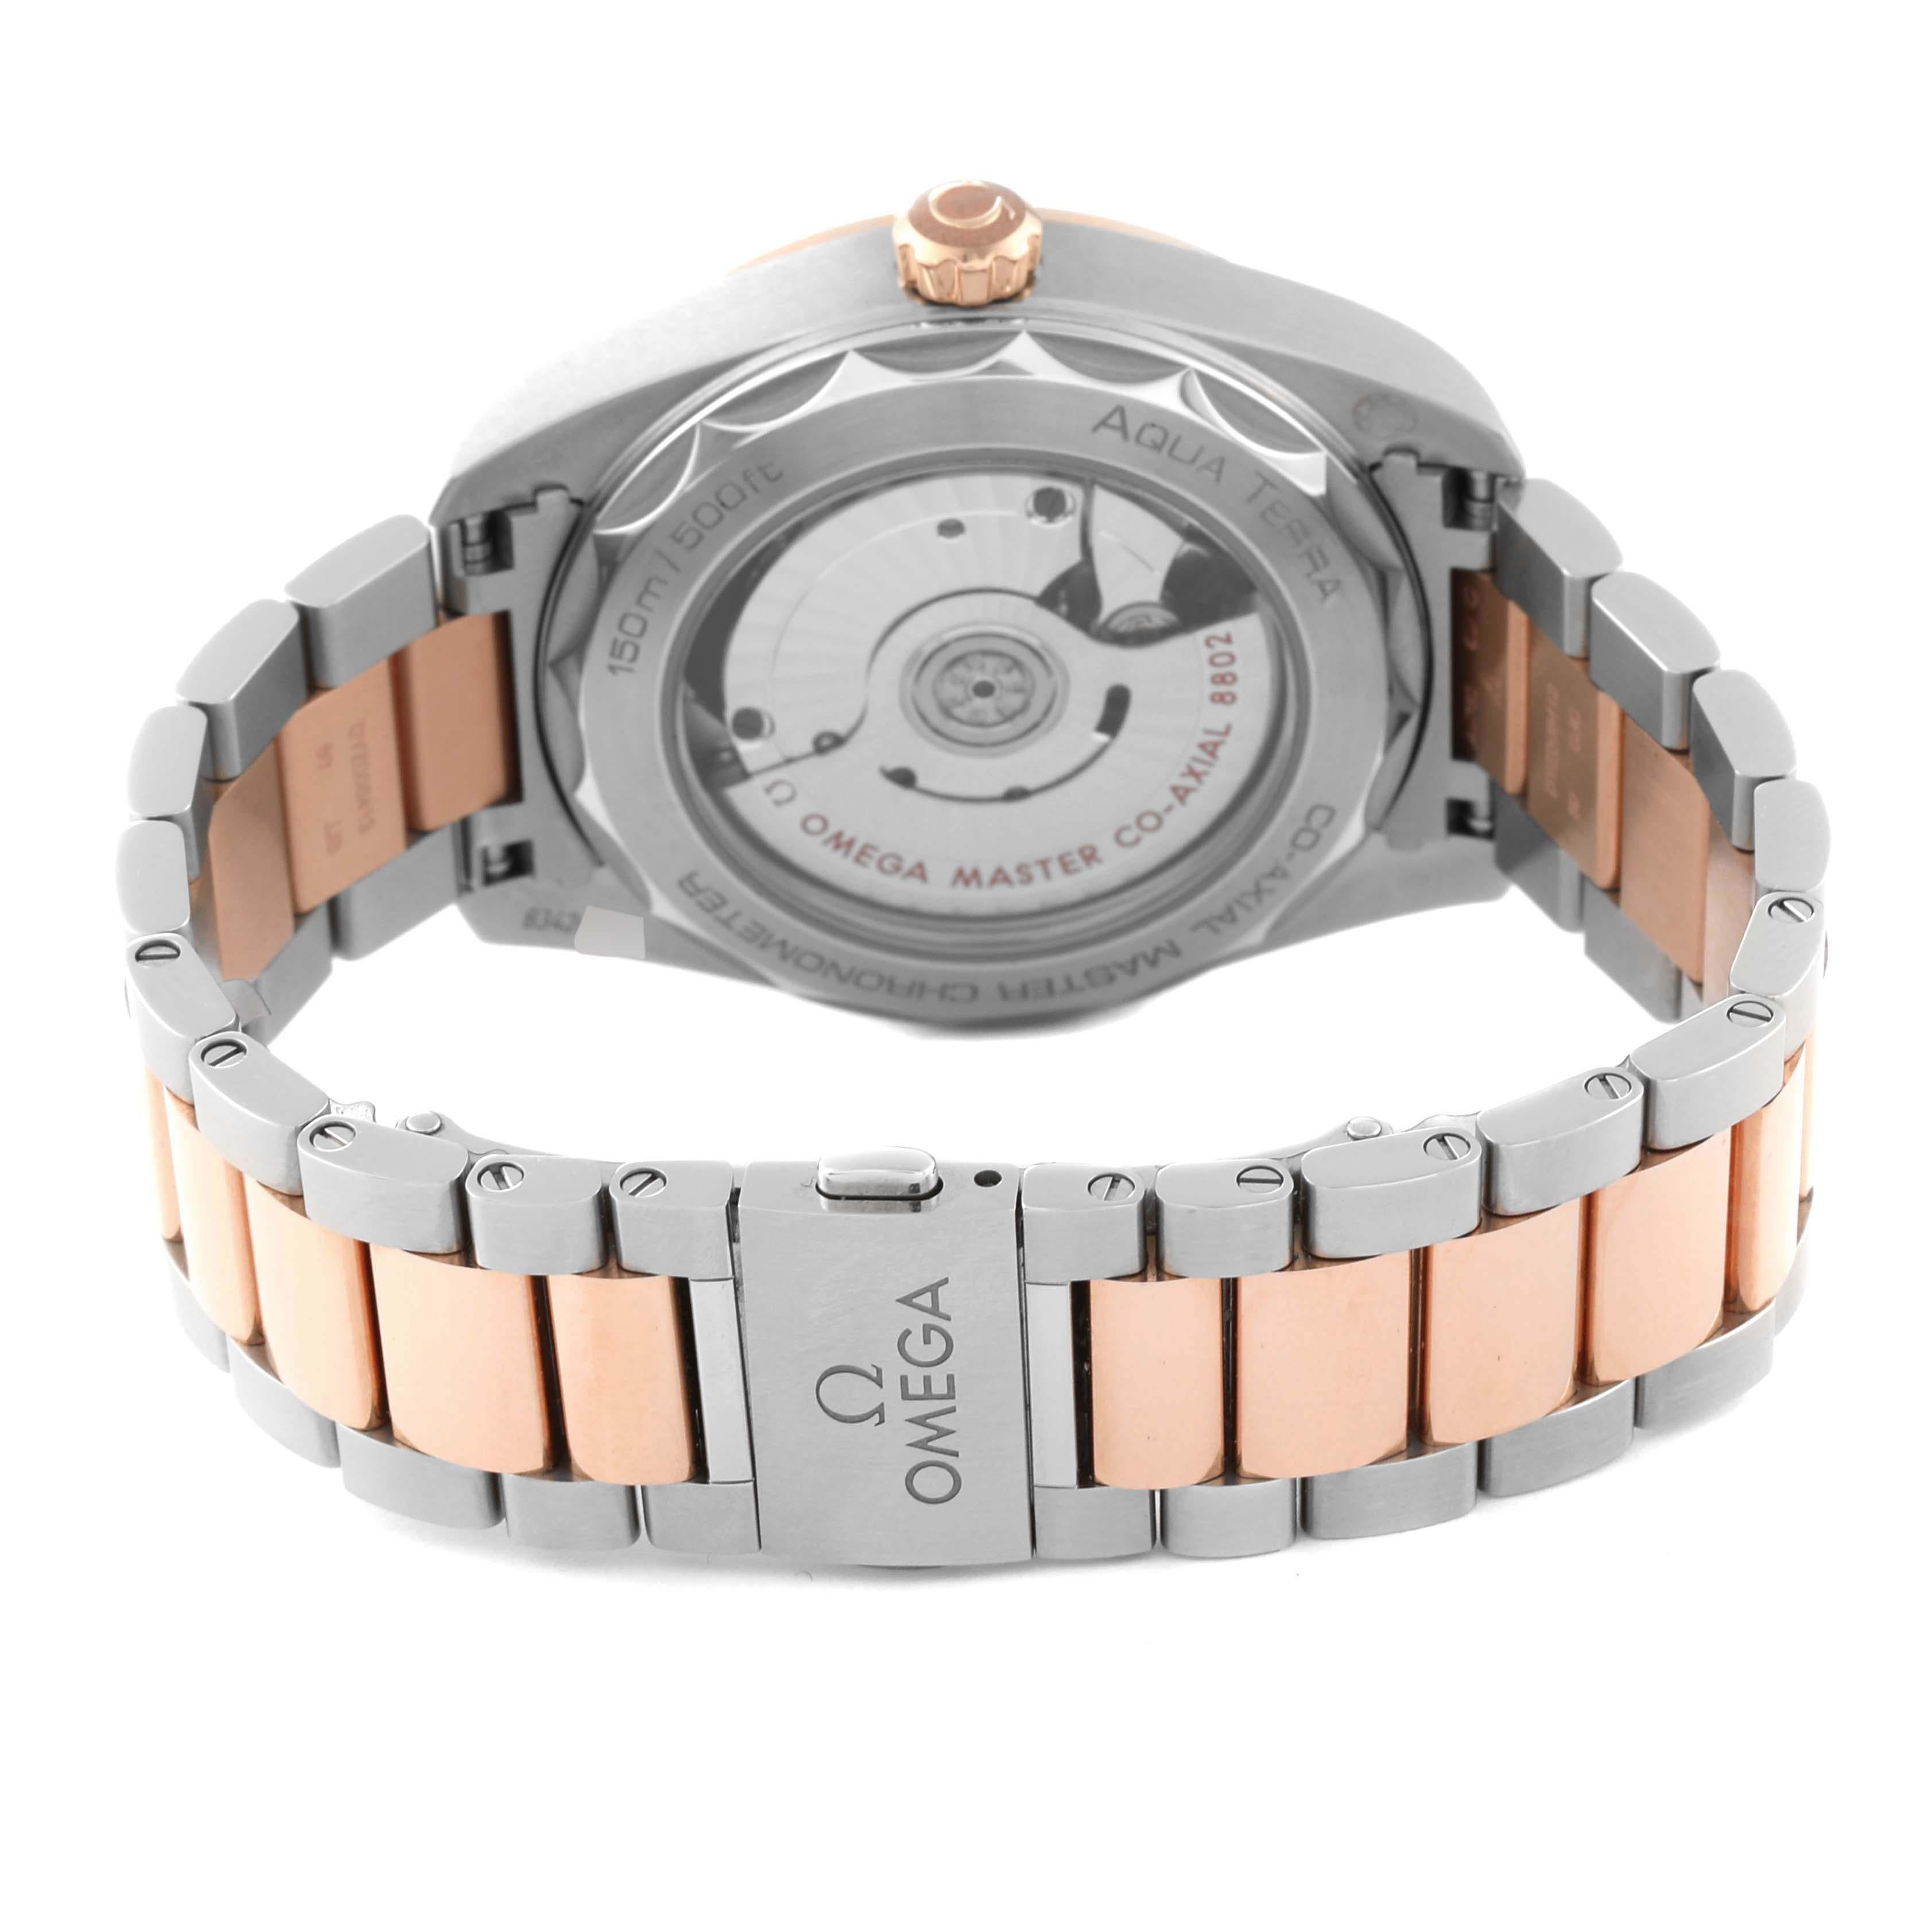 Omega Aqua Terra Steel Rose Gold Mother Of Pearl Diamond Ladies Watch 220.20.38.20.55.002 Box Card. Self-winding movement with Co-Axial escapement. Certified Master Chronometer, approved by METAS, resistant to magnetic fields reaching 15,000 gauss.